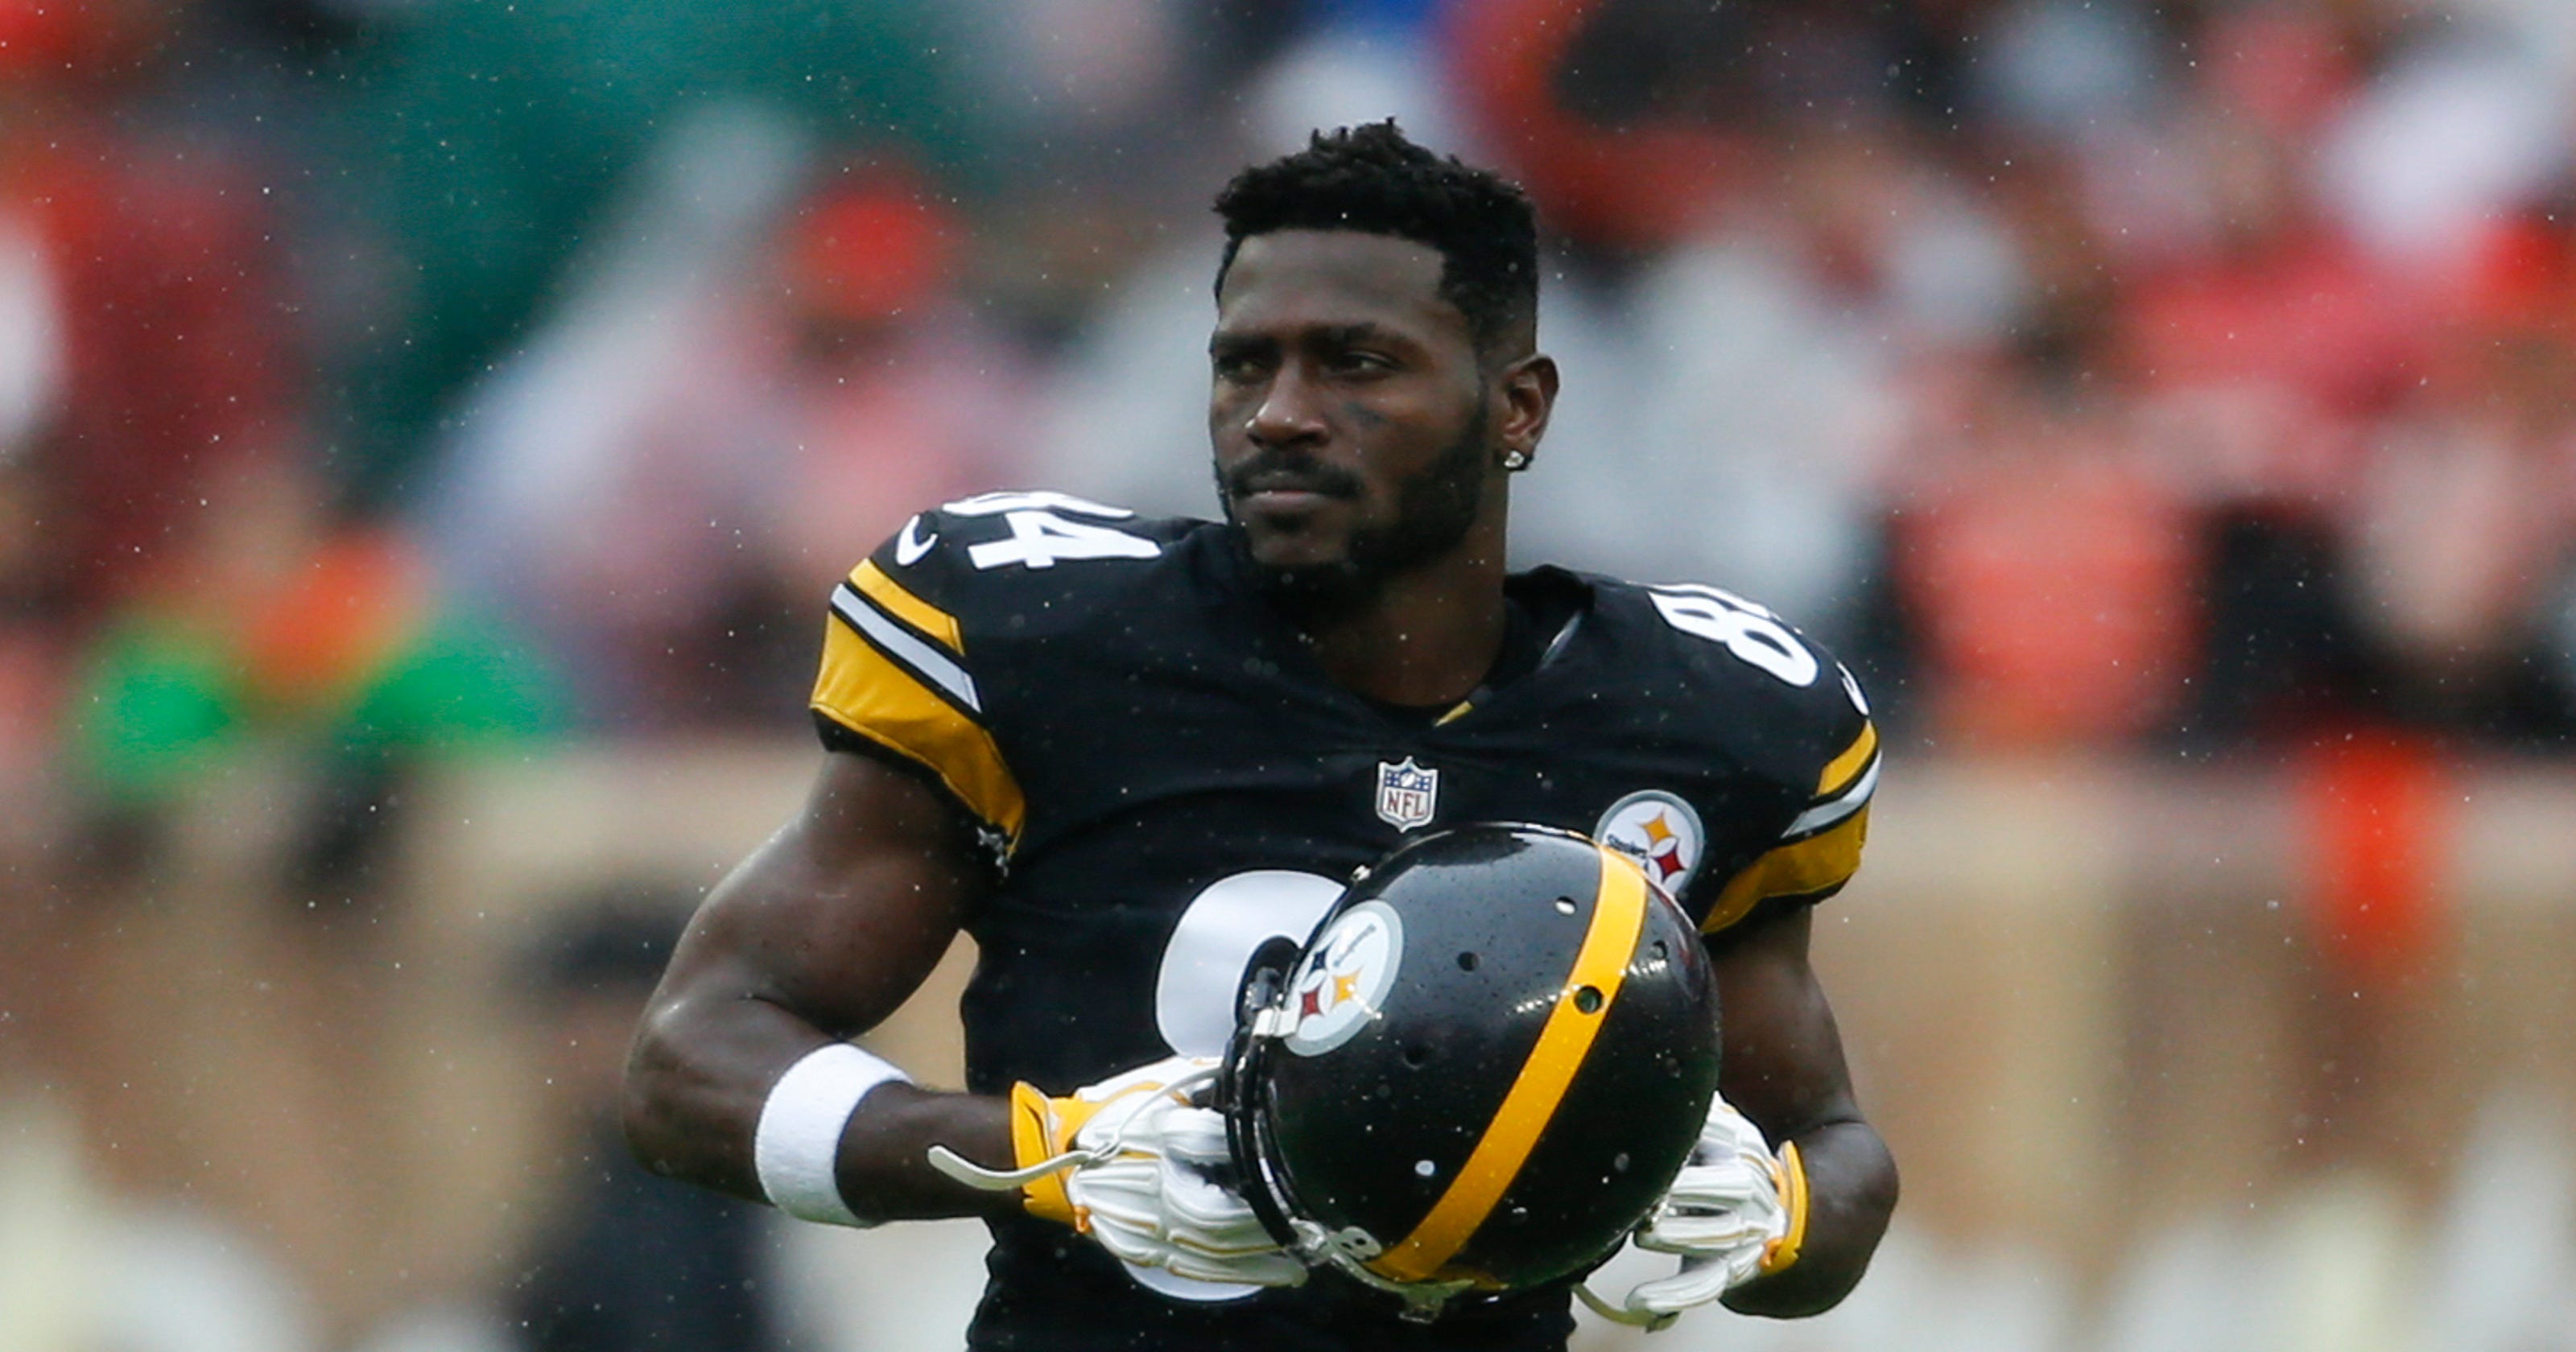 Antonio Brown: Absence from Steelers' practice may be unexcused